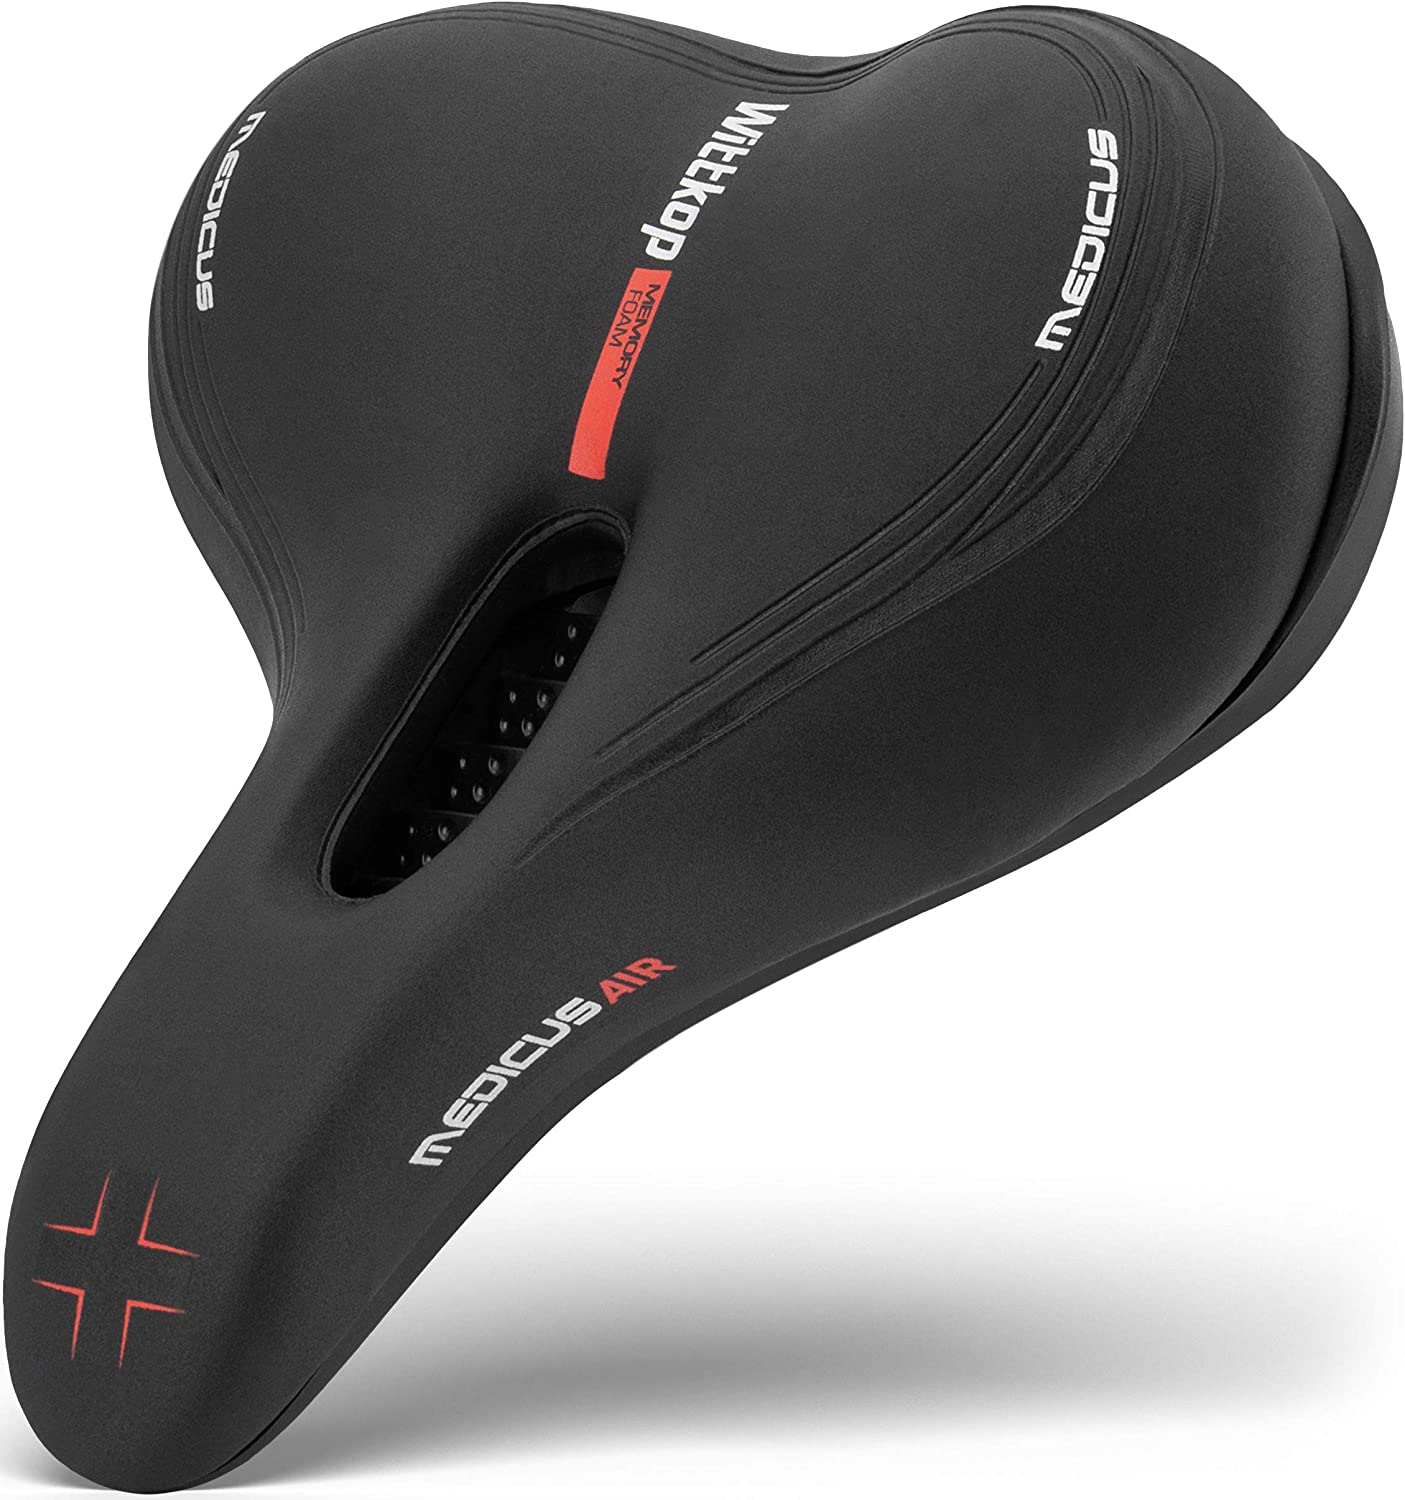 Wittkop Bike Seat - best replacement seat for nordictrack s22i